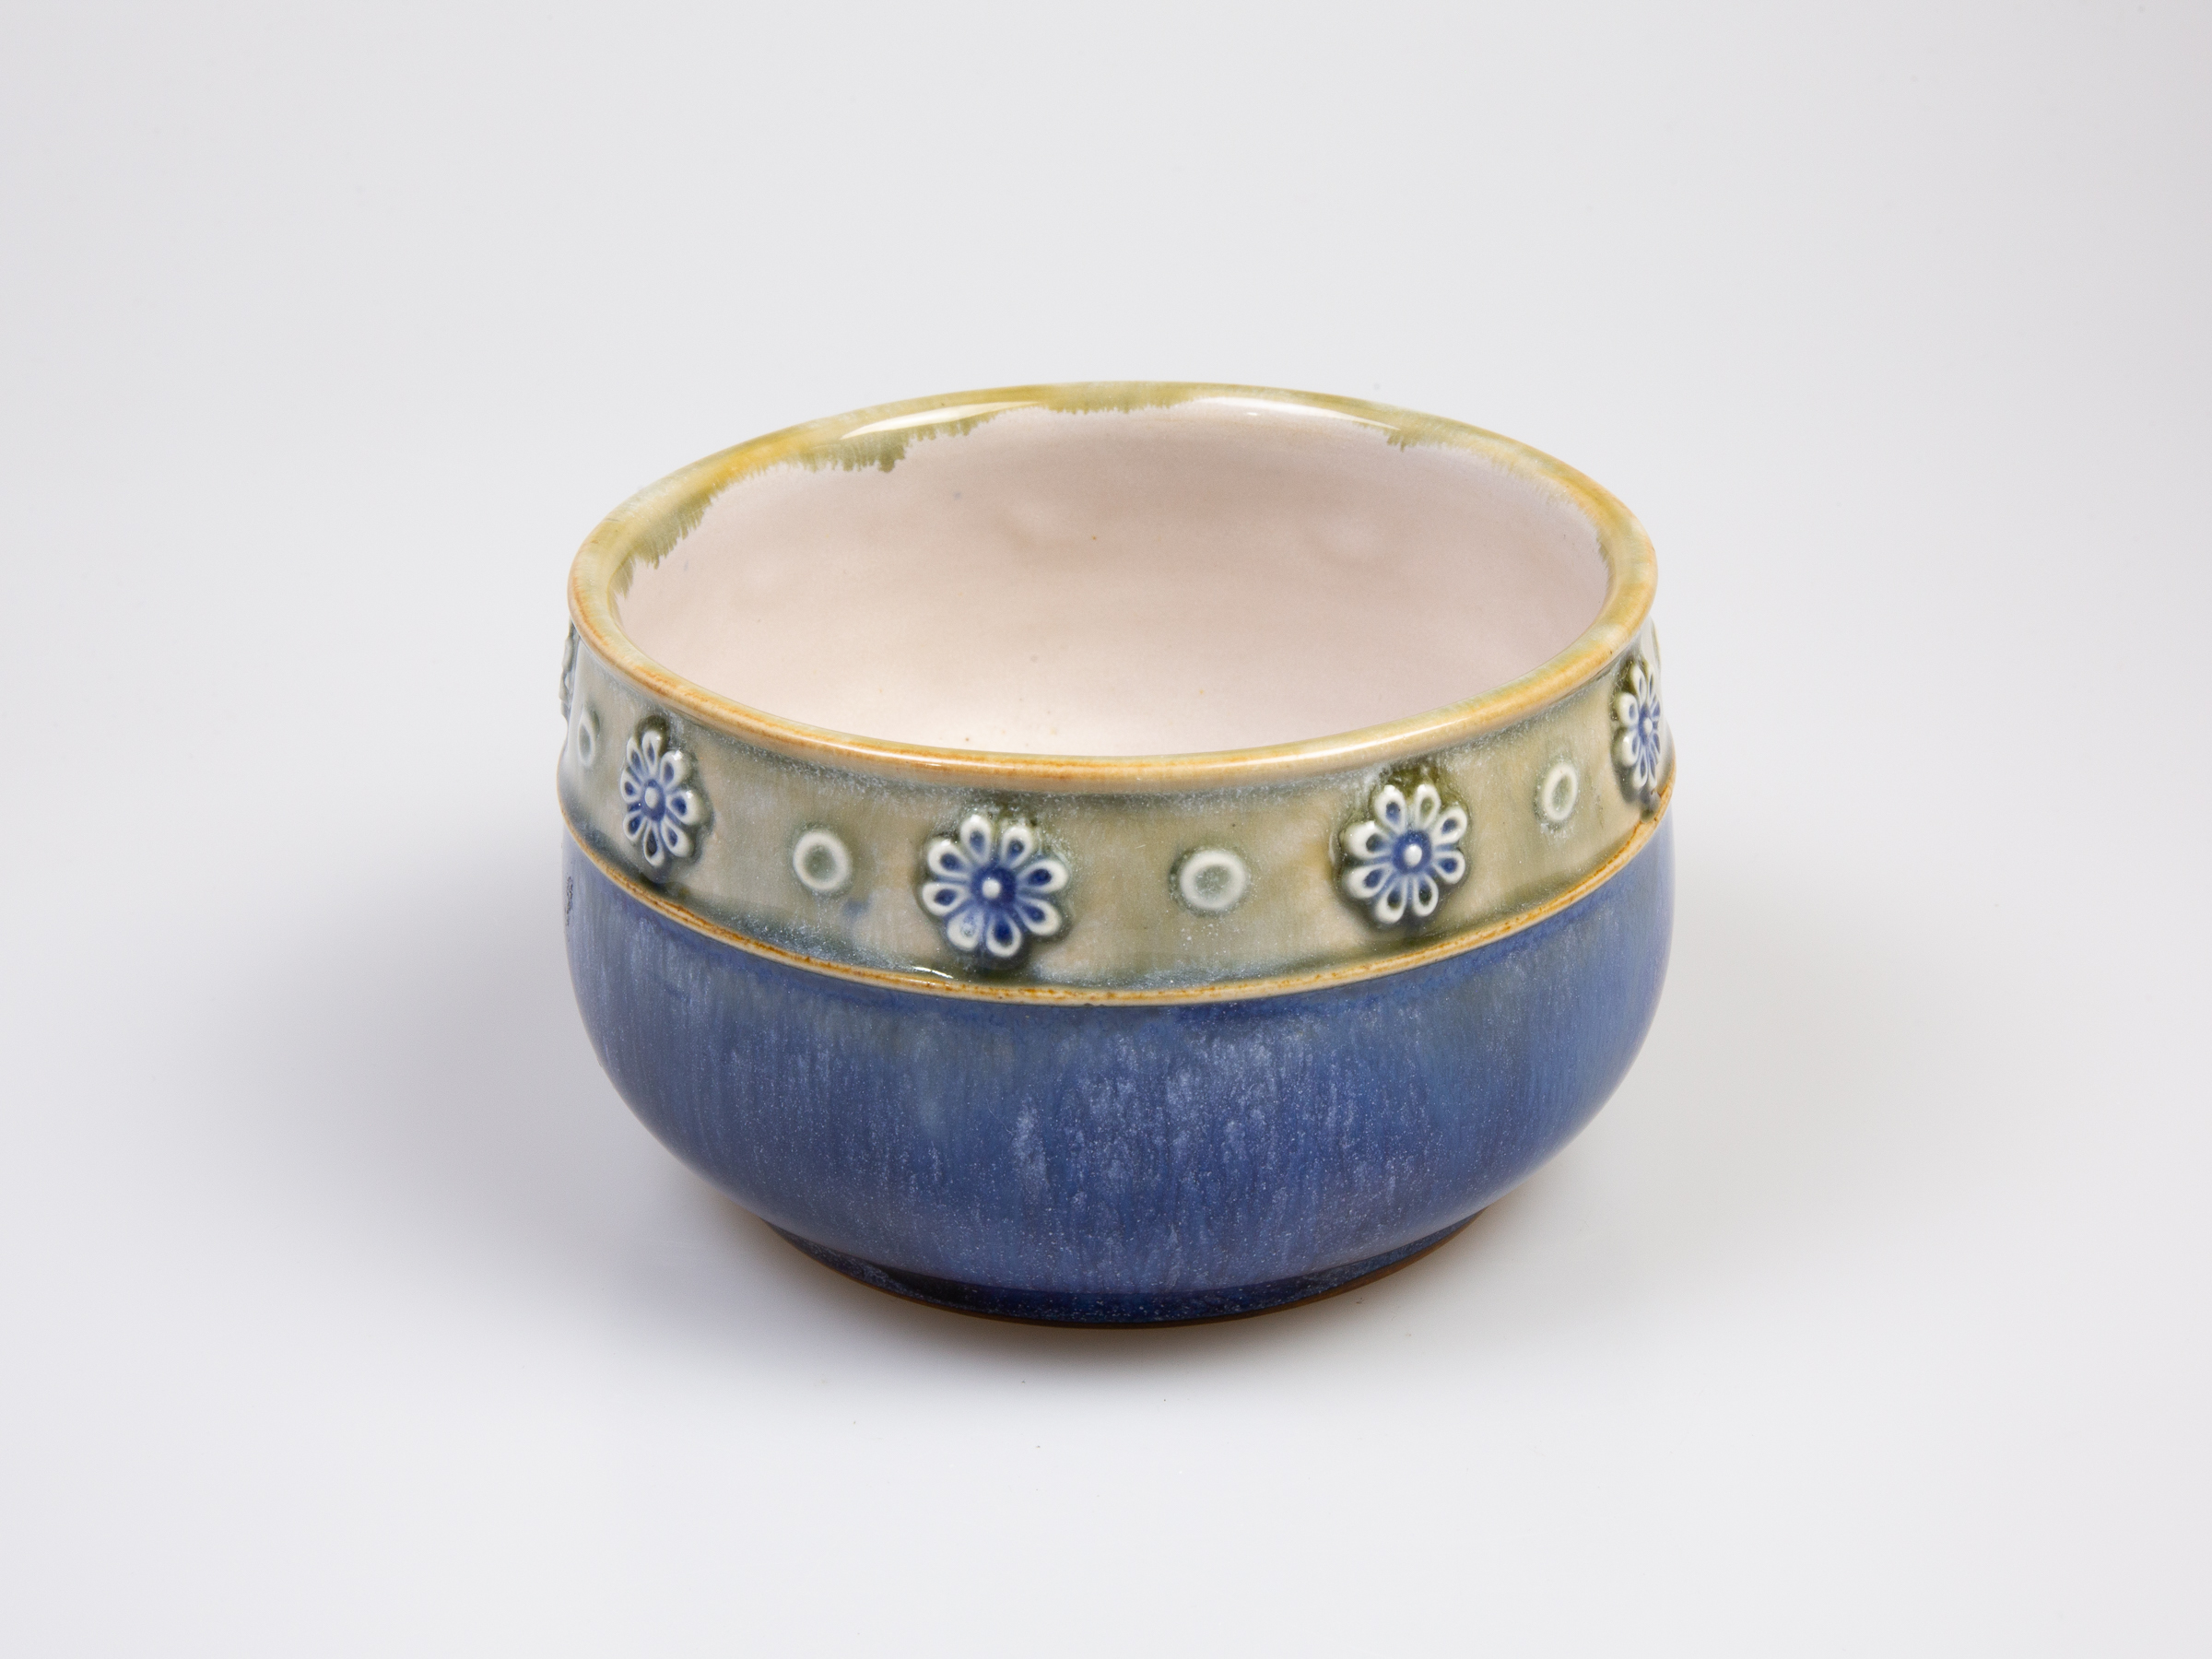 c1923 to 1927 small Royal Doulton bowl. Pretty bowl in iconic Doulton colours. Marked 8200 and accredited to artist Louisa Ayling. Measures approximately 85mm in diameter at base and 110mm across the top. Main photo of bowl seen from a slightly raised eye level angle